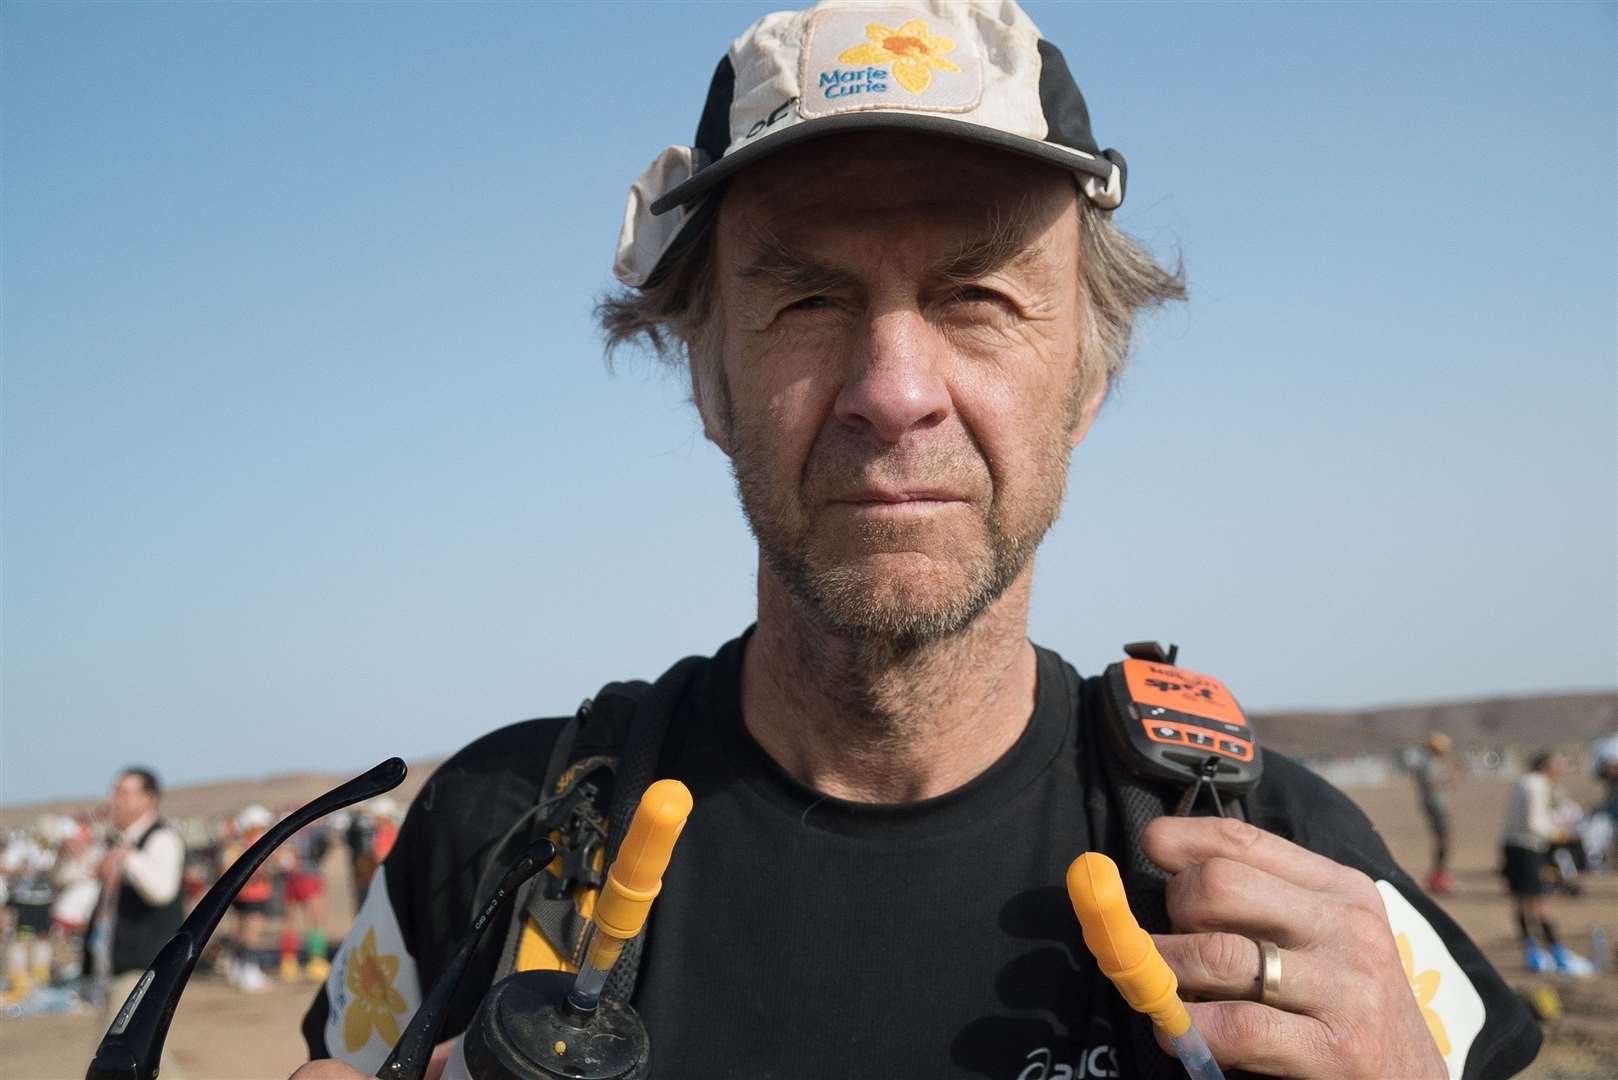 Sir Ranulph Fiennes on the first day of the Marathon des Sables.